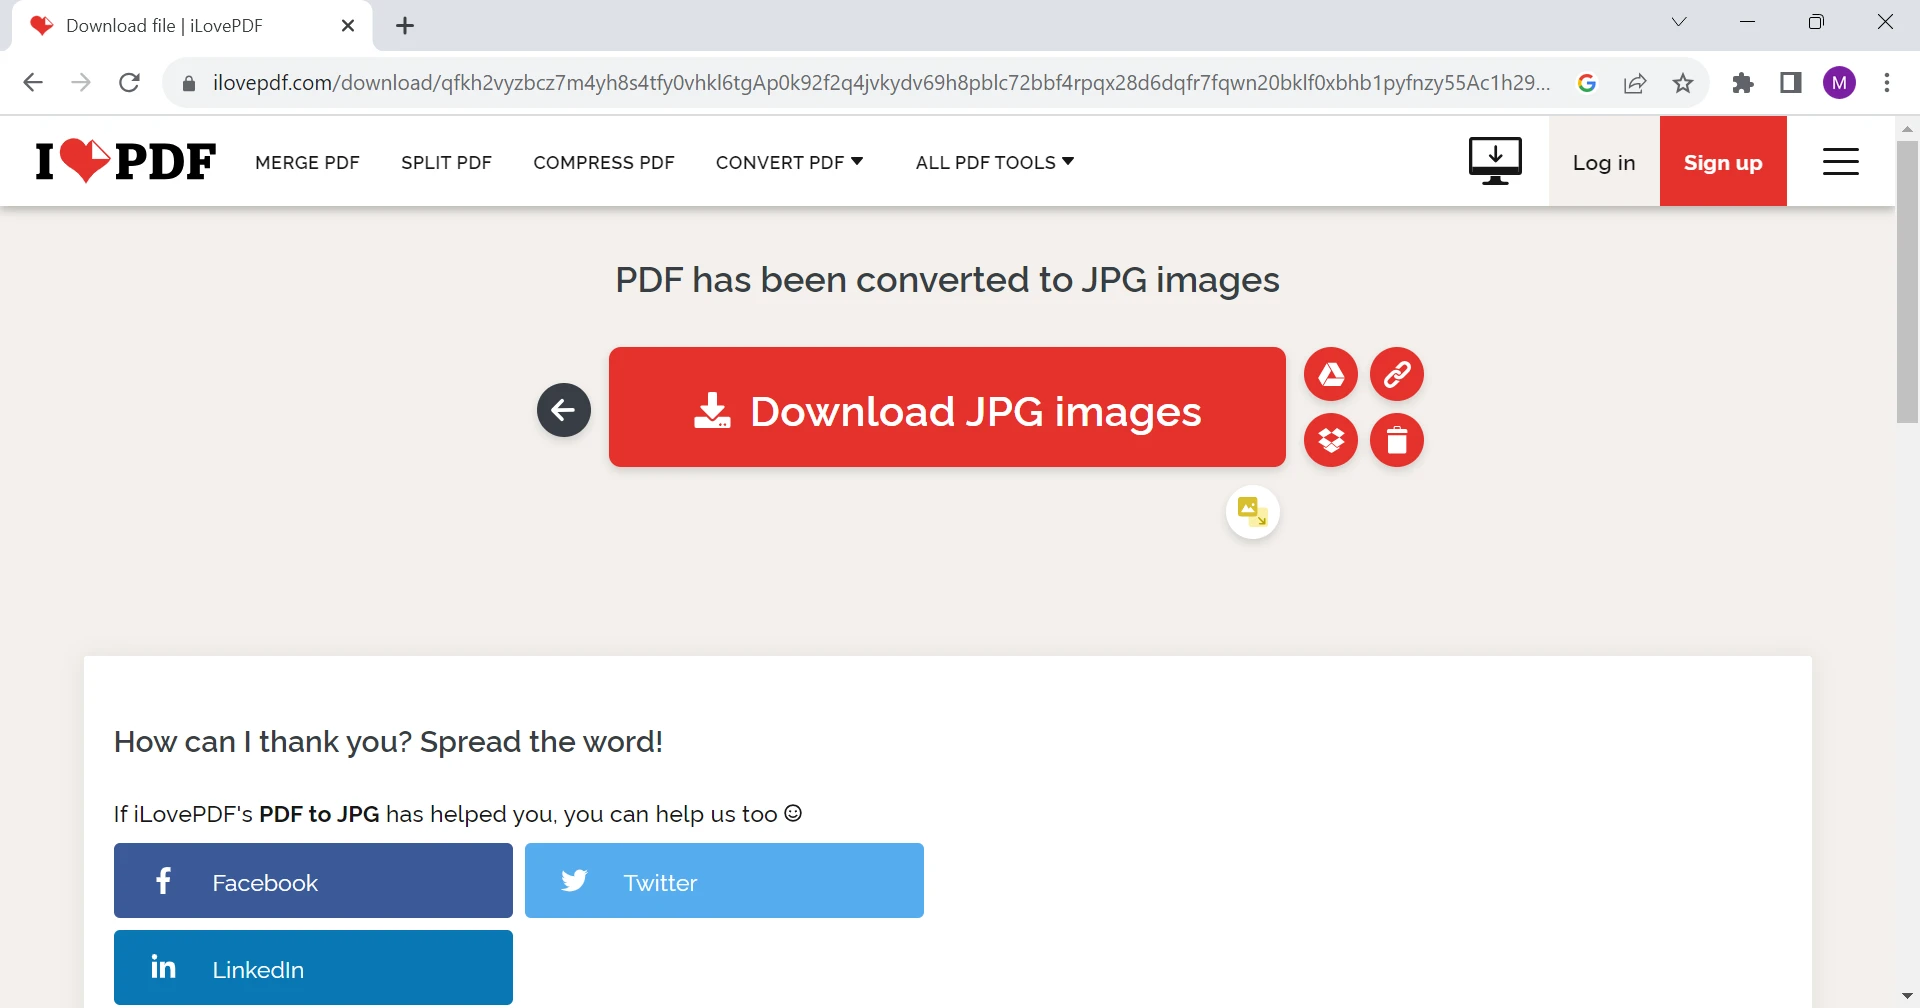 How to save PDF as JPEG (Beginner Guide): Figure 4 - Download the JPG images once the conversion is complete